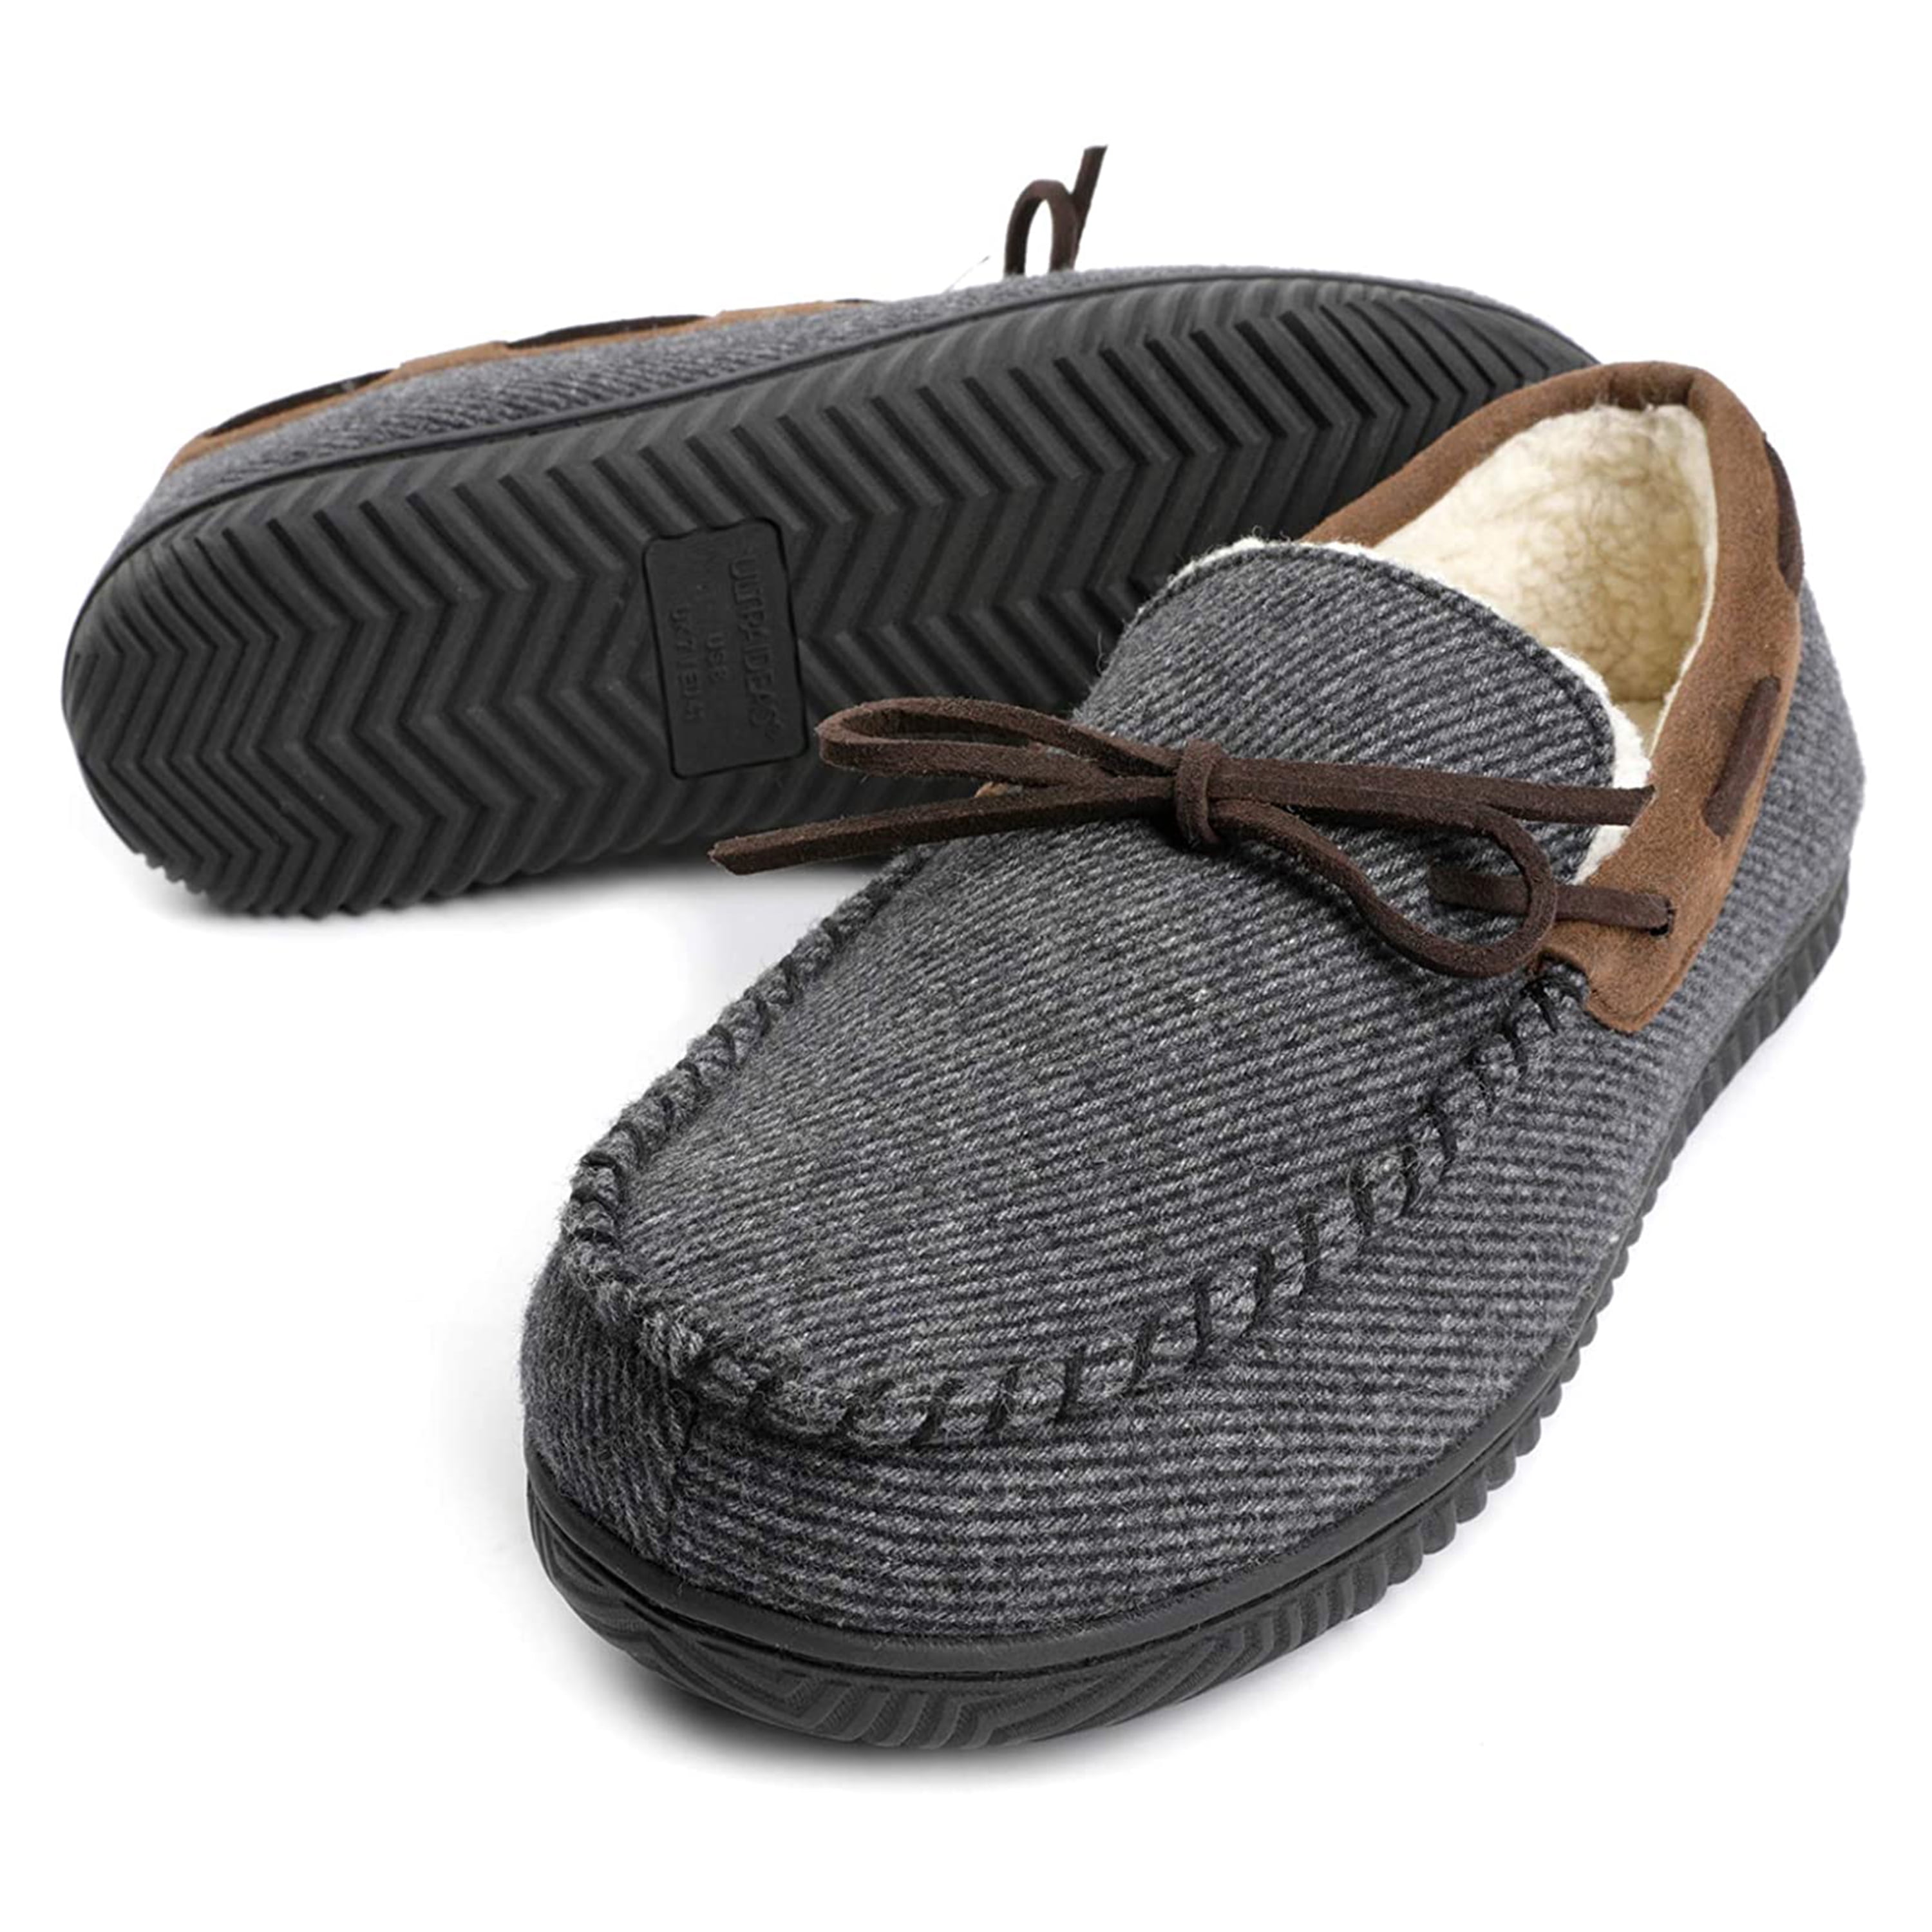 Mens Memory Foam Moccasin Slippers Anti-Skid Rubber Sole Loafers House Shoes 